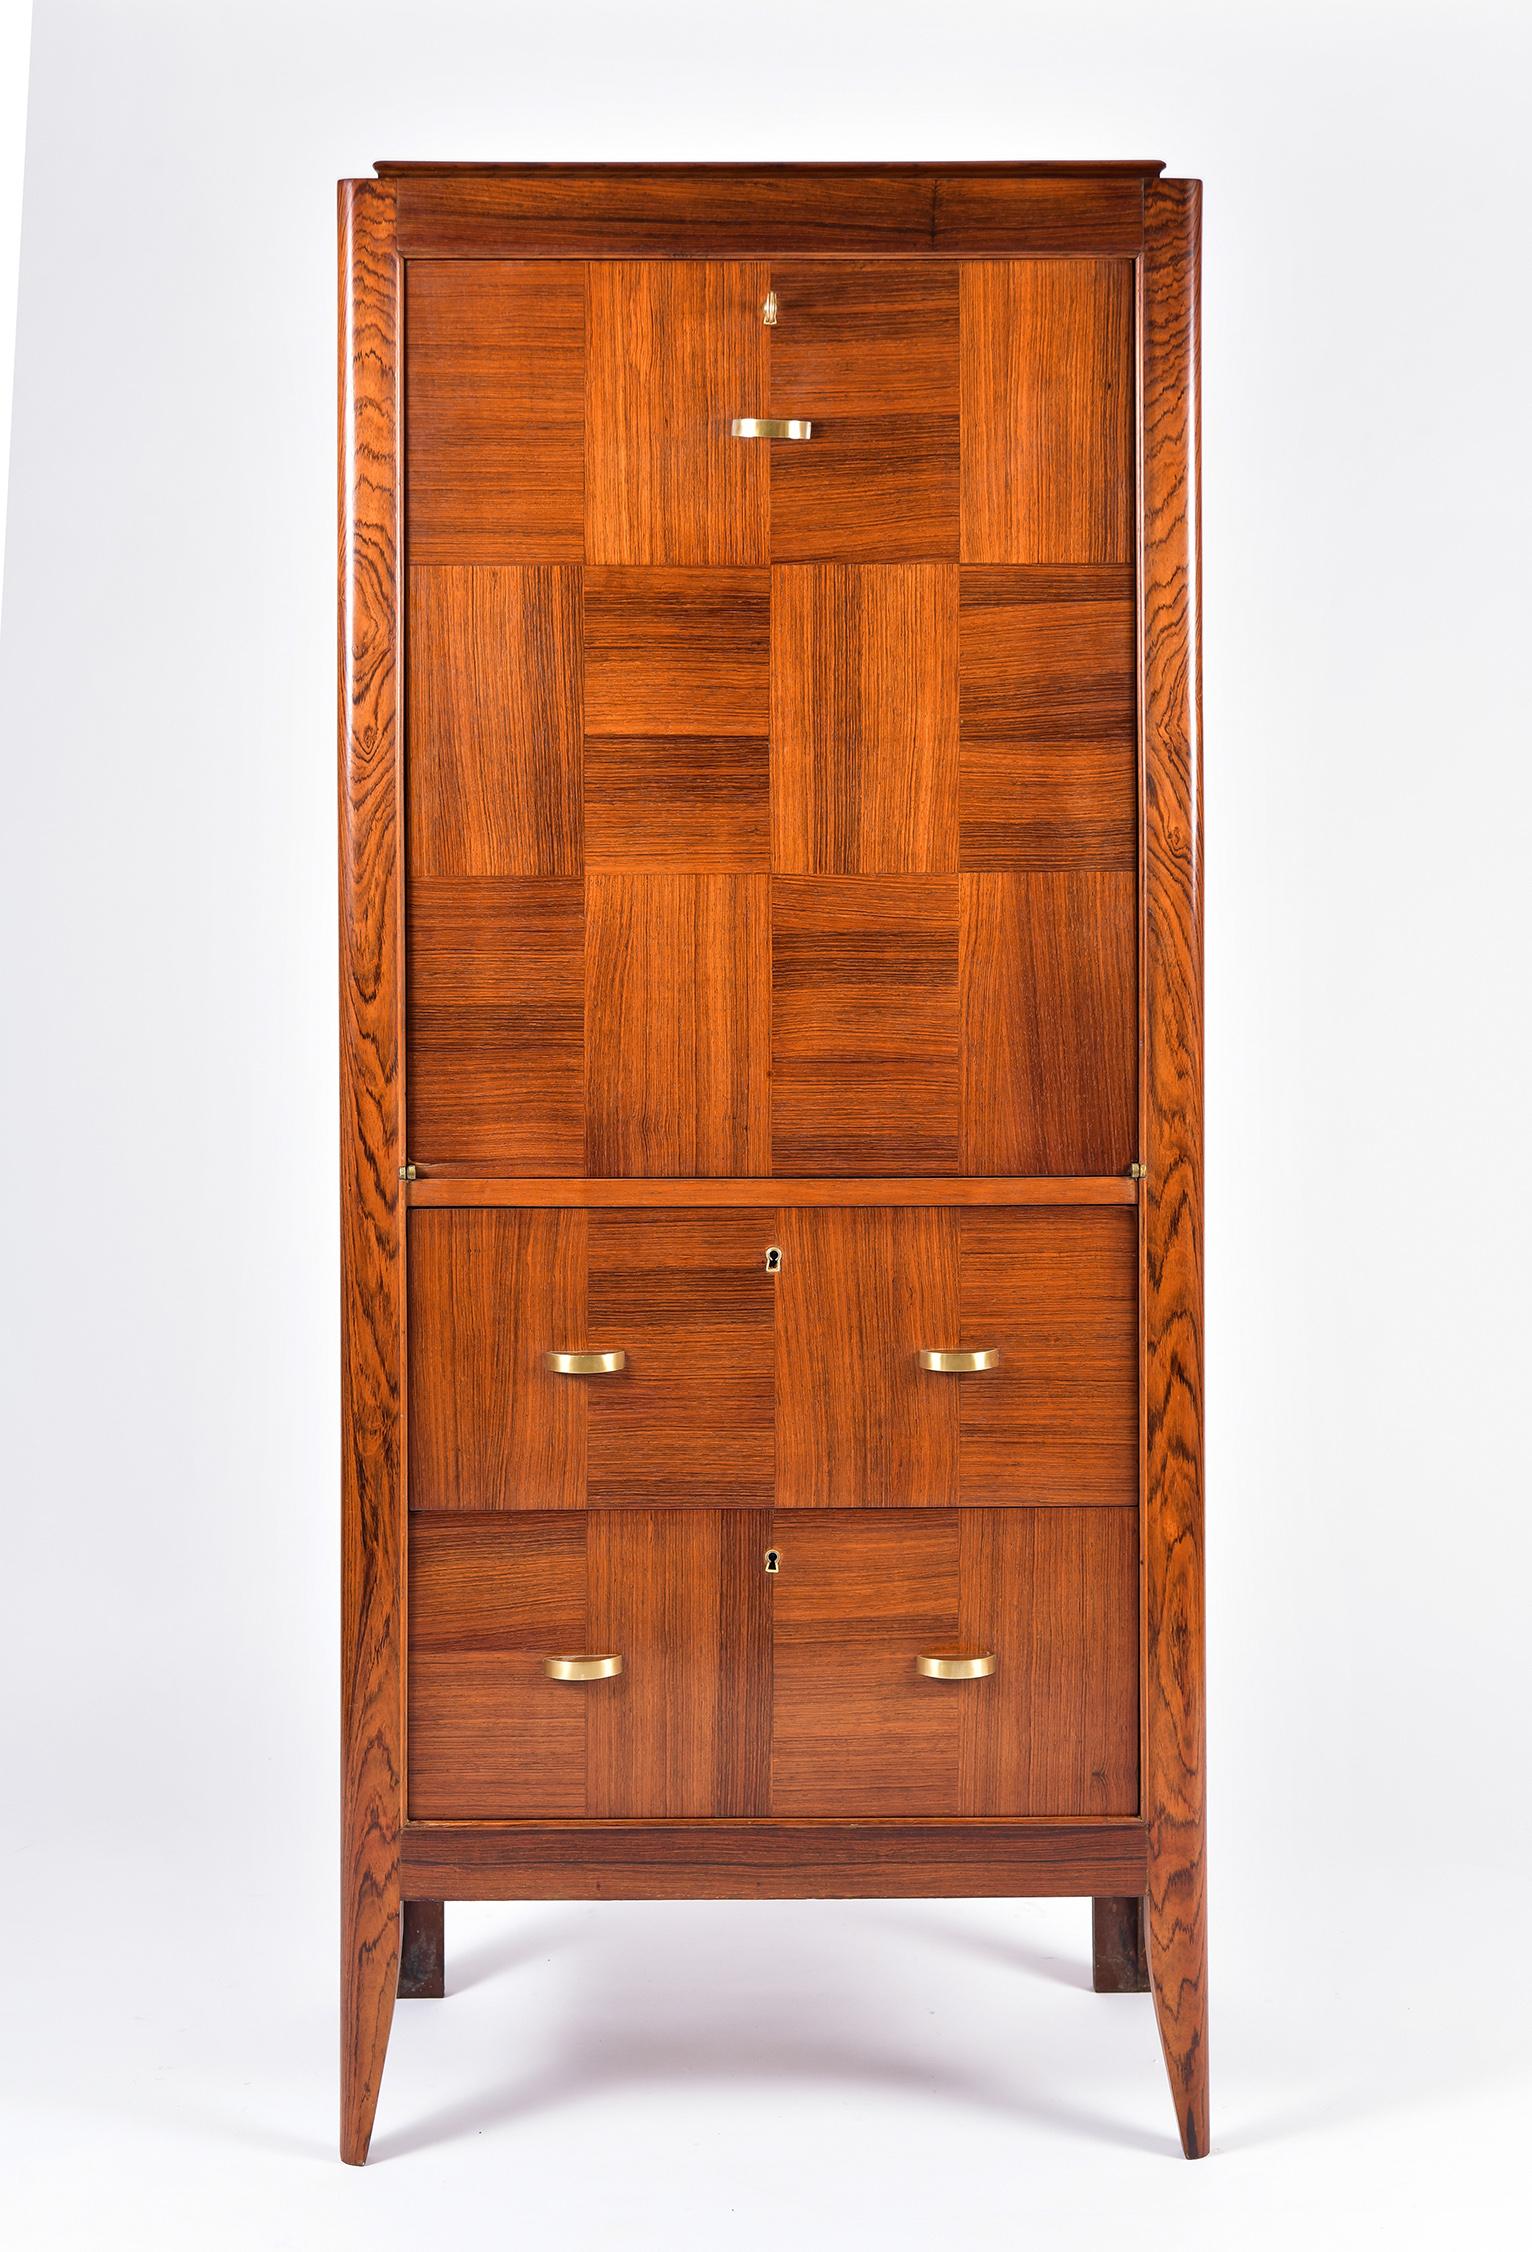 An Art Deco kingwood cocktail cabinet, attributed to Alfred Porteneuve (1896-1949)
The kingwood parquetry facade consisting of two drawers and an abattant, with brass handles and key, on tapered legs.
France, circa 1930.